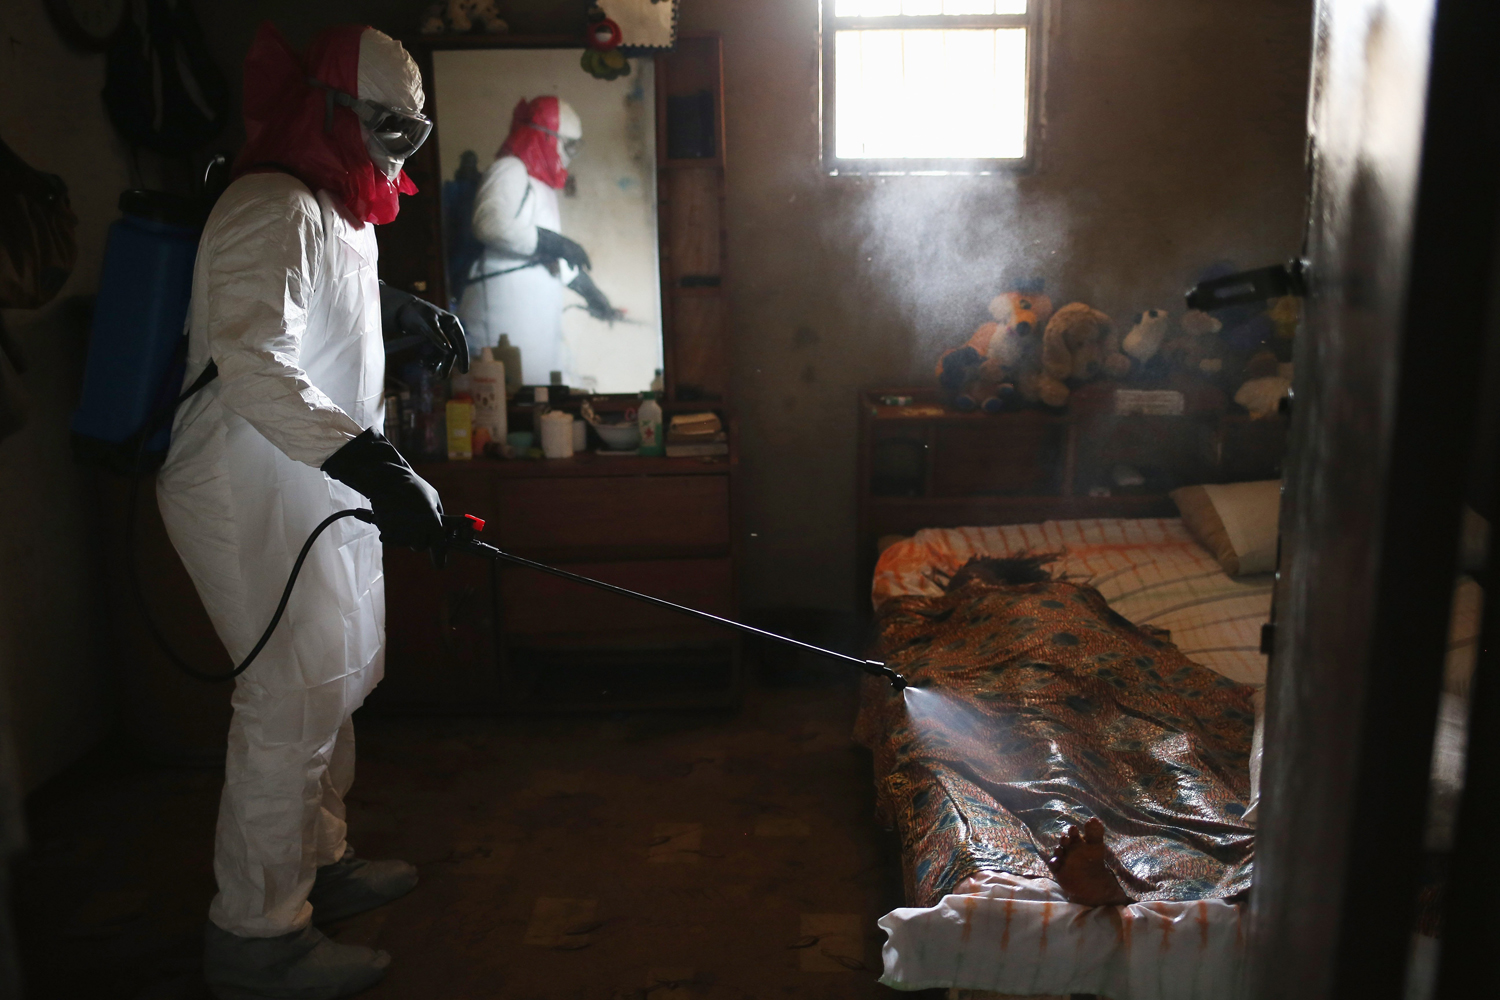 Aug. 14, 2014. A burial team from the Liberian health department sprays disinfectant over the body of a woman suspected of dying of the Ebola virus in Monrovia, Liberia.